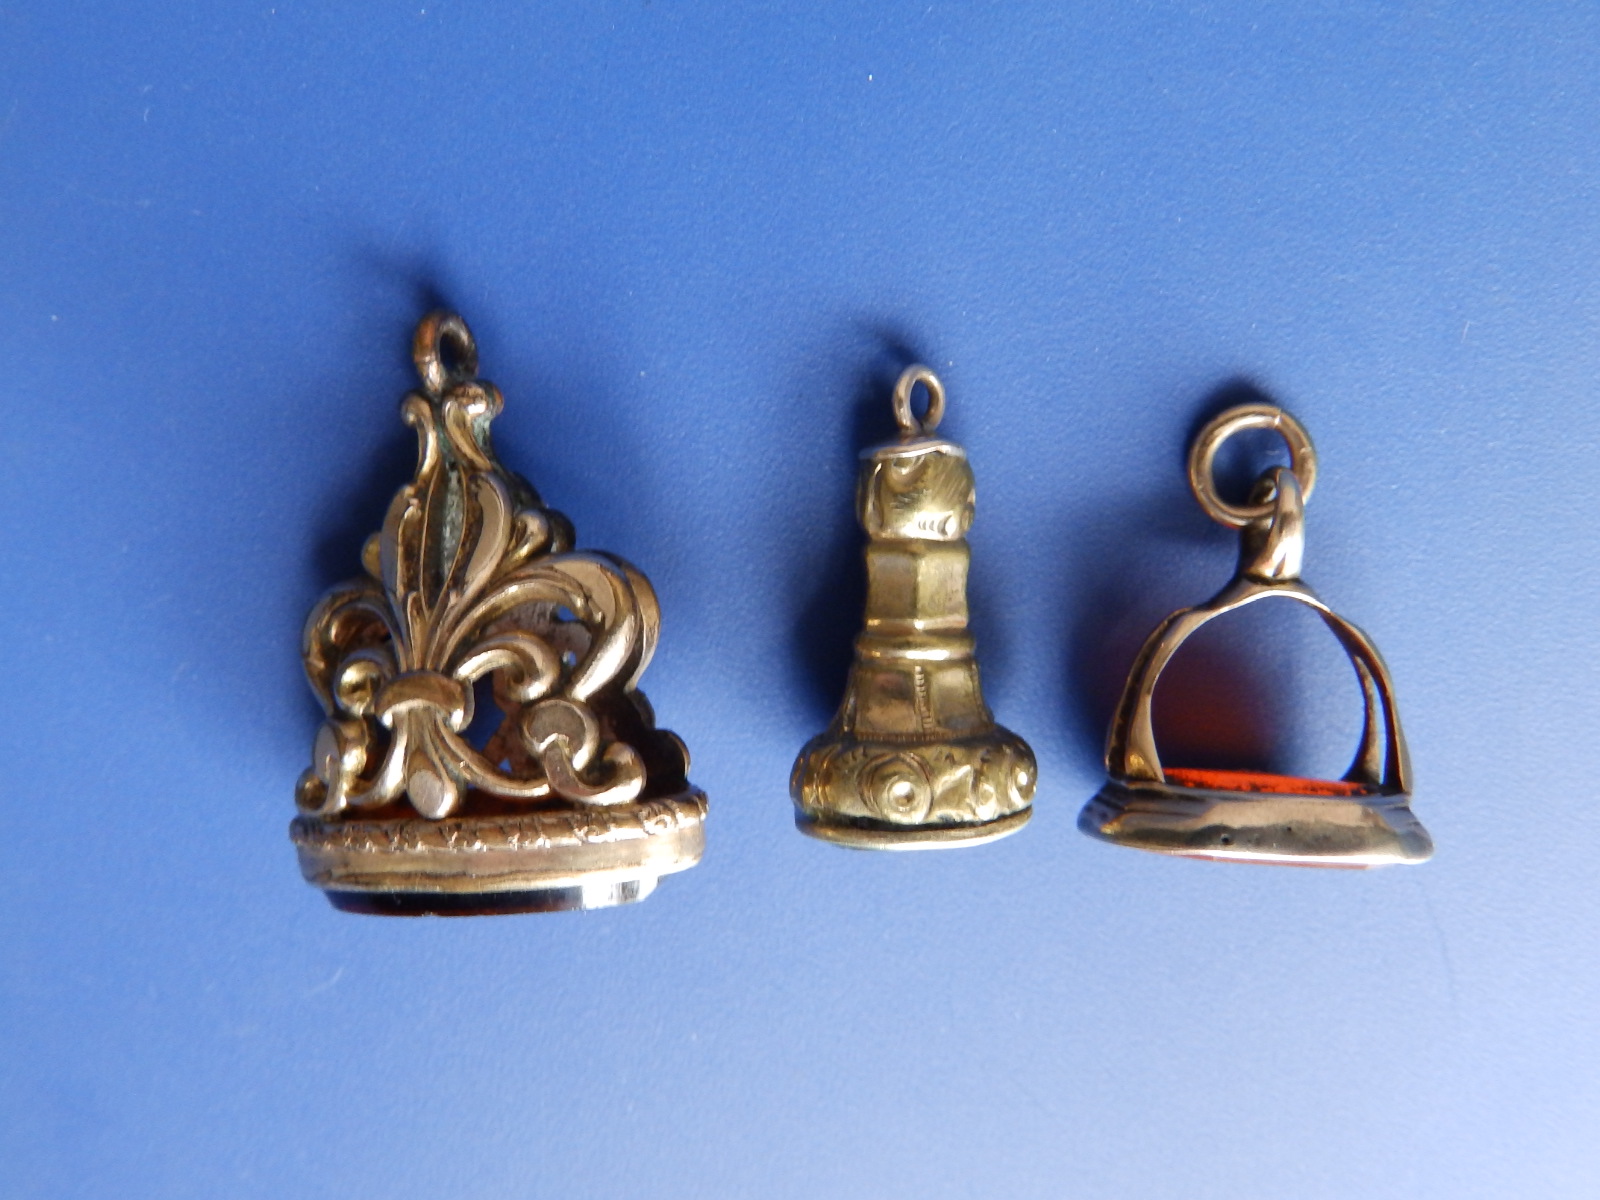 Three antique seal fob pendants, the largest 1.1" high having chips to the obsidian stone. - Image 3 of 6